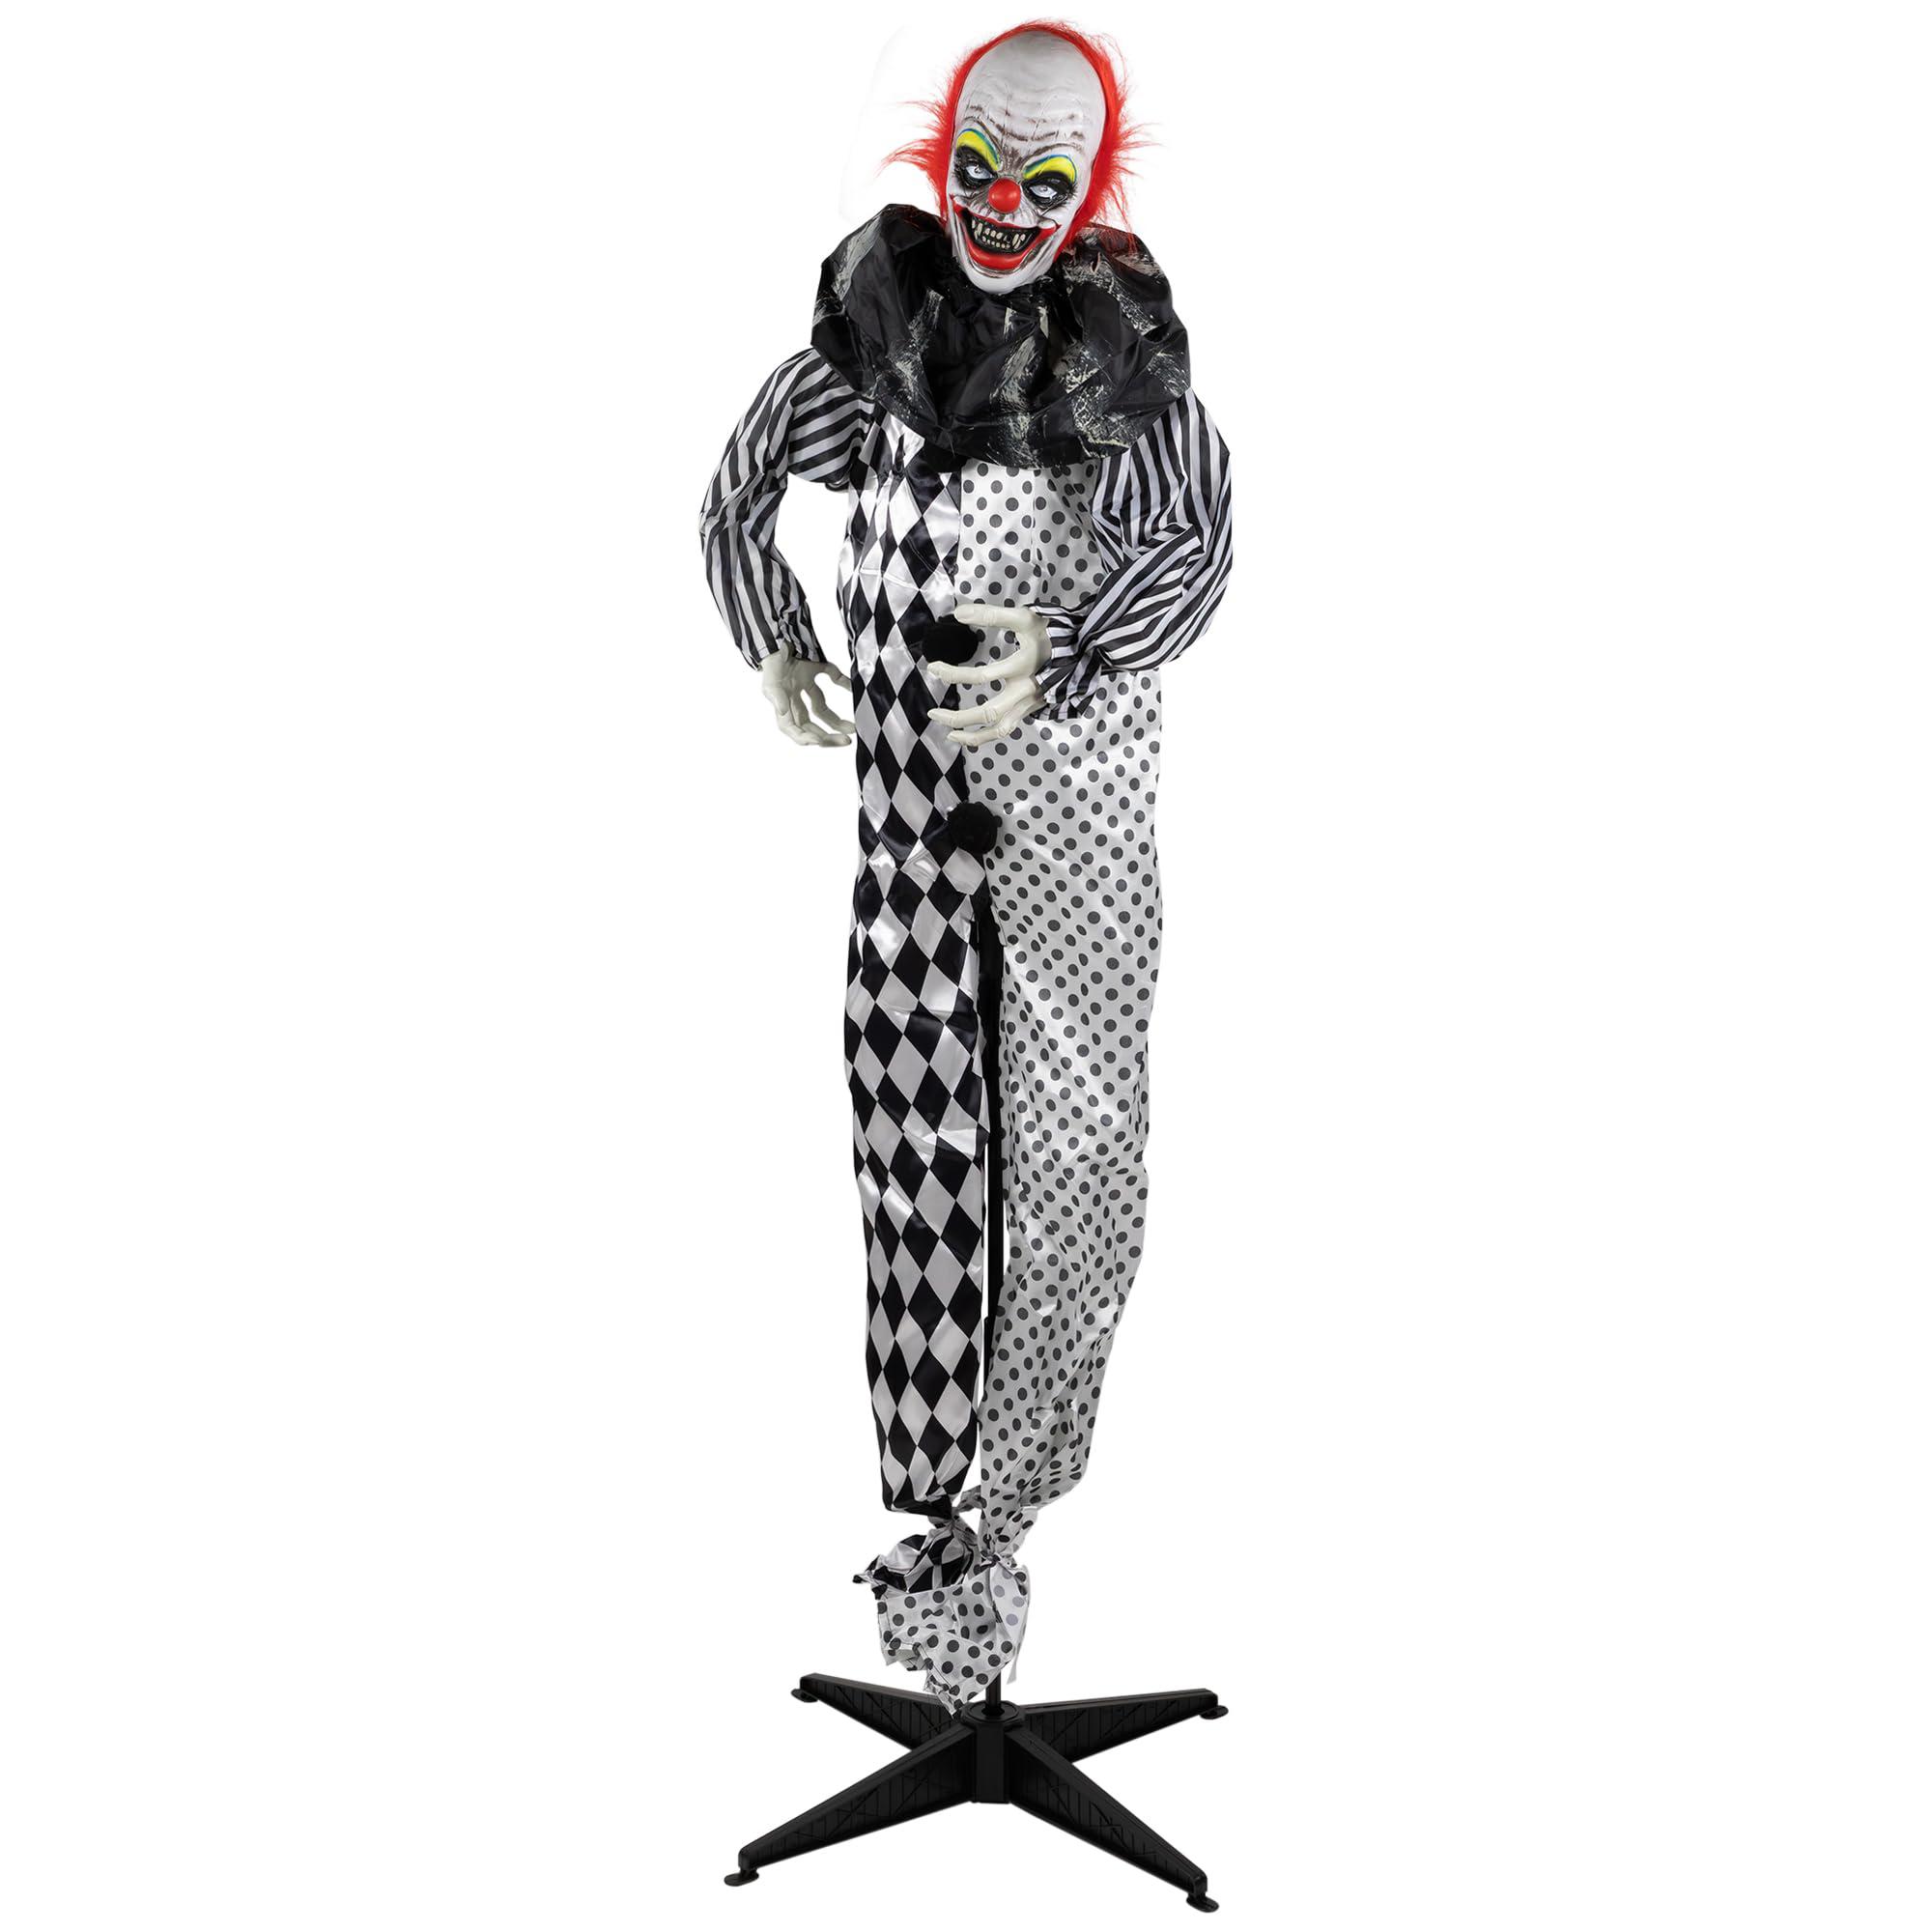 northlight spooky town 5.5' animated standing clown with glowing eyes halloween decoration